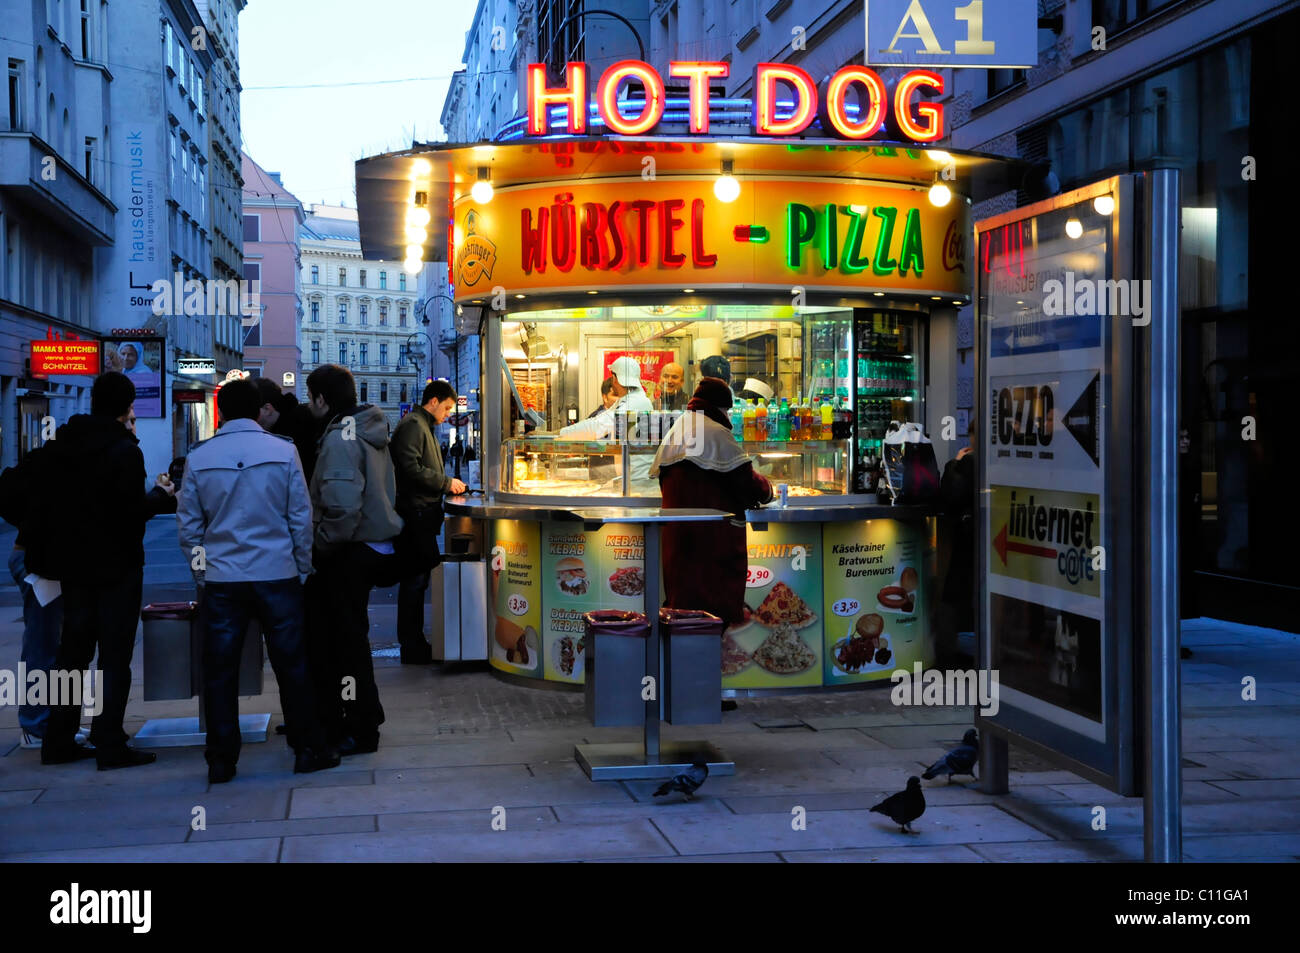 Hot Dog and Pizza stand near St. Stephen's Cathedral, Vienna, Austria, Europe Stock Photo